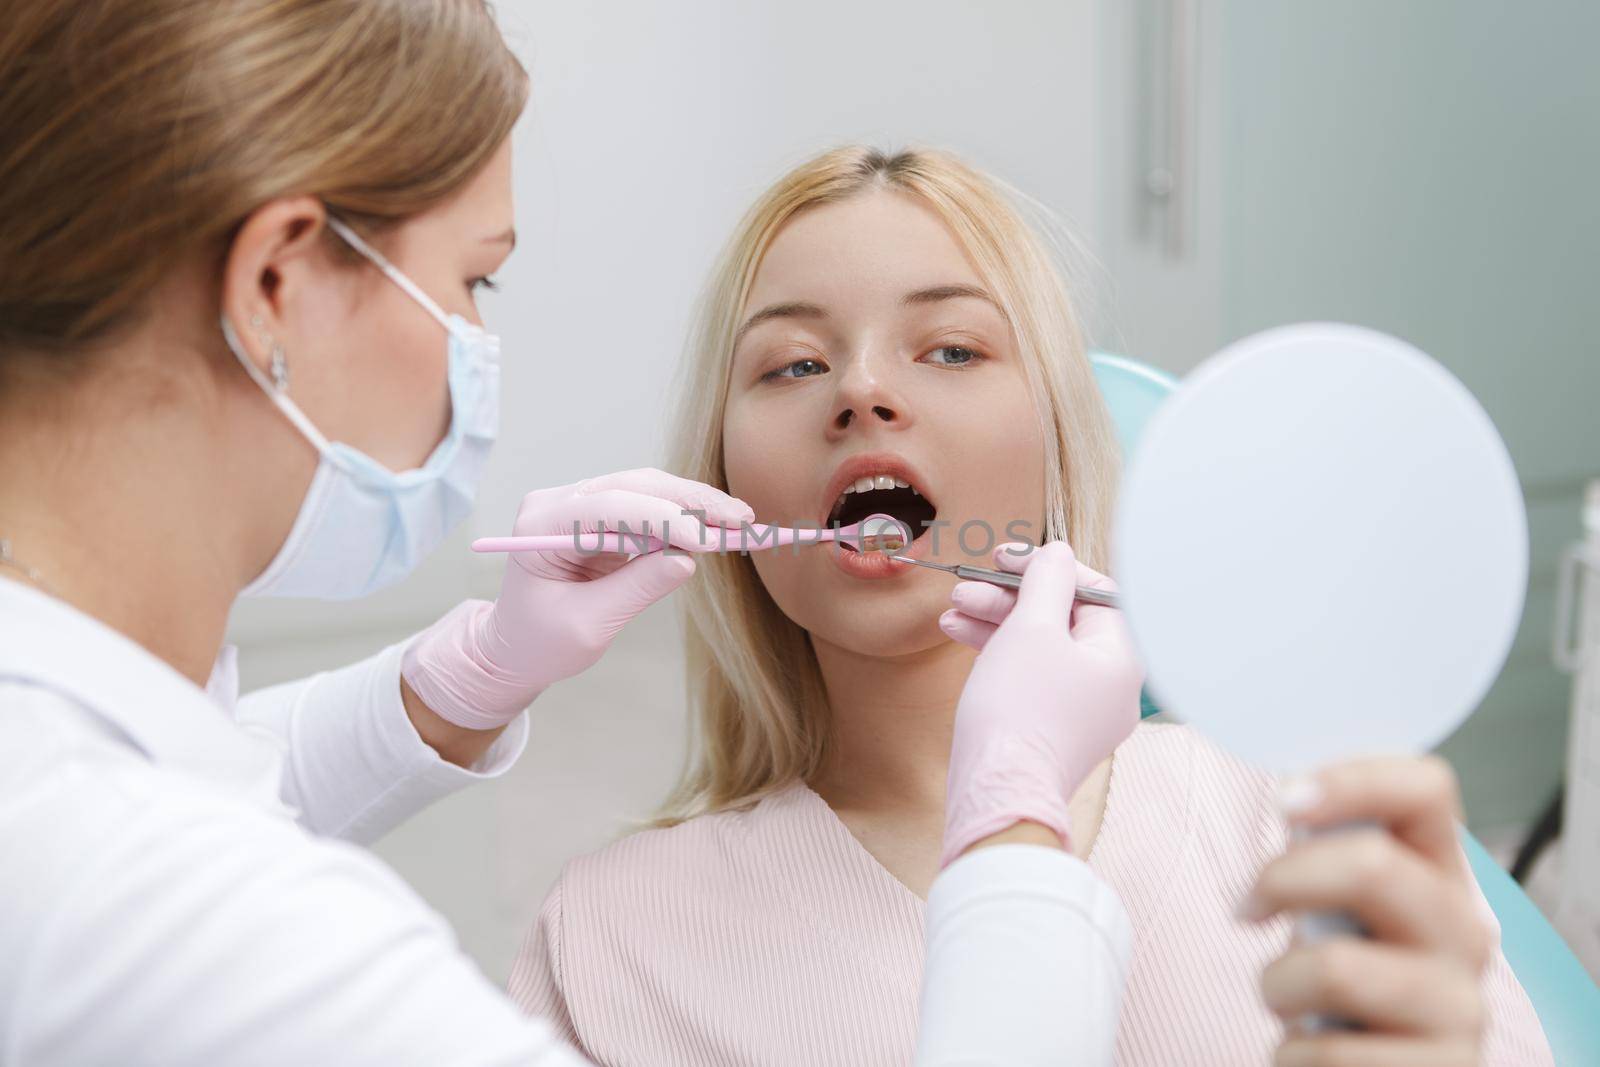 Woman looking into mirror while dentist checking her teeth